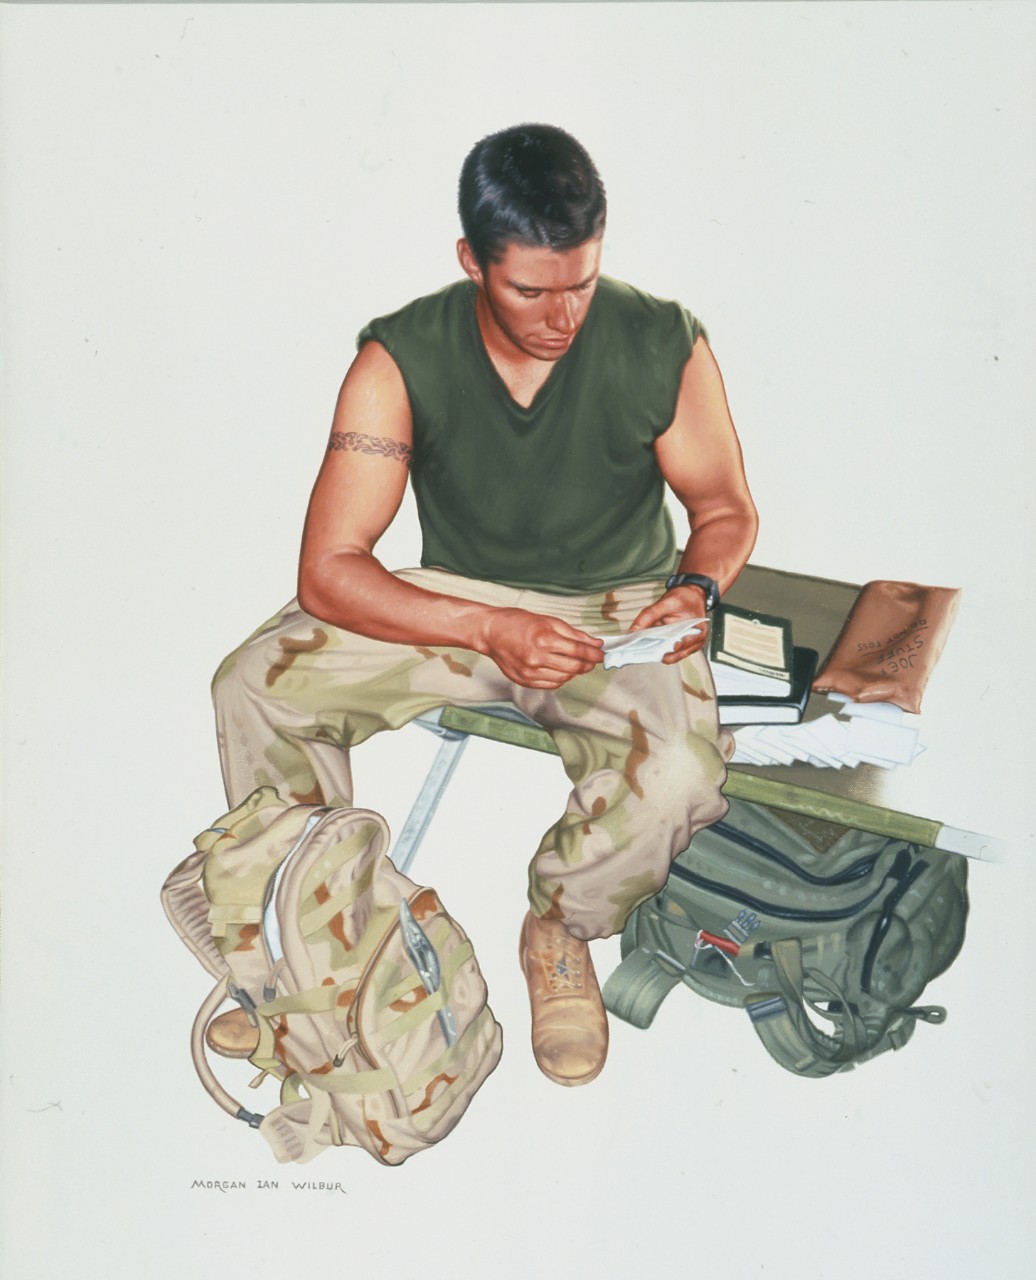 A navy corpsman sits on a cot reading a letter